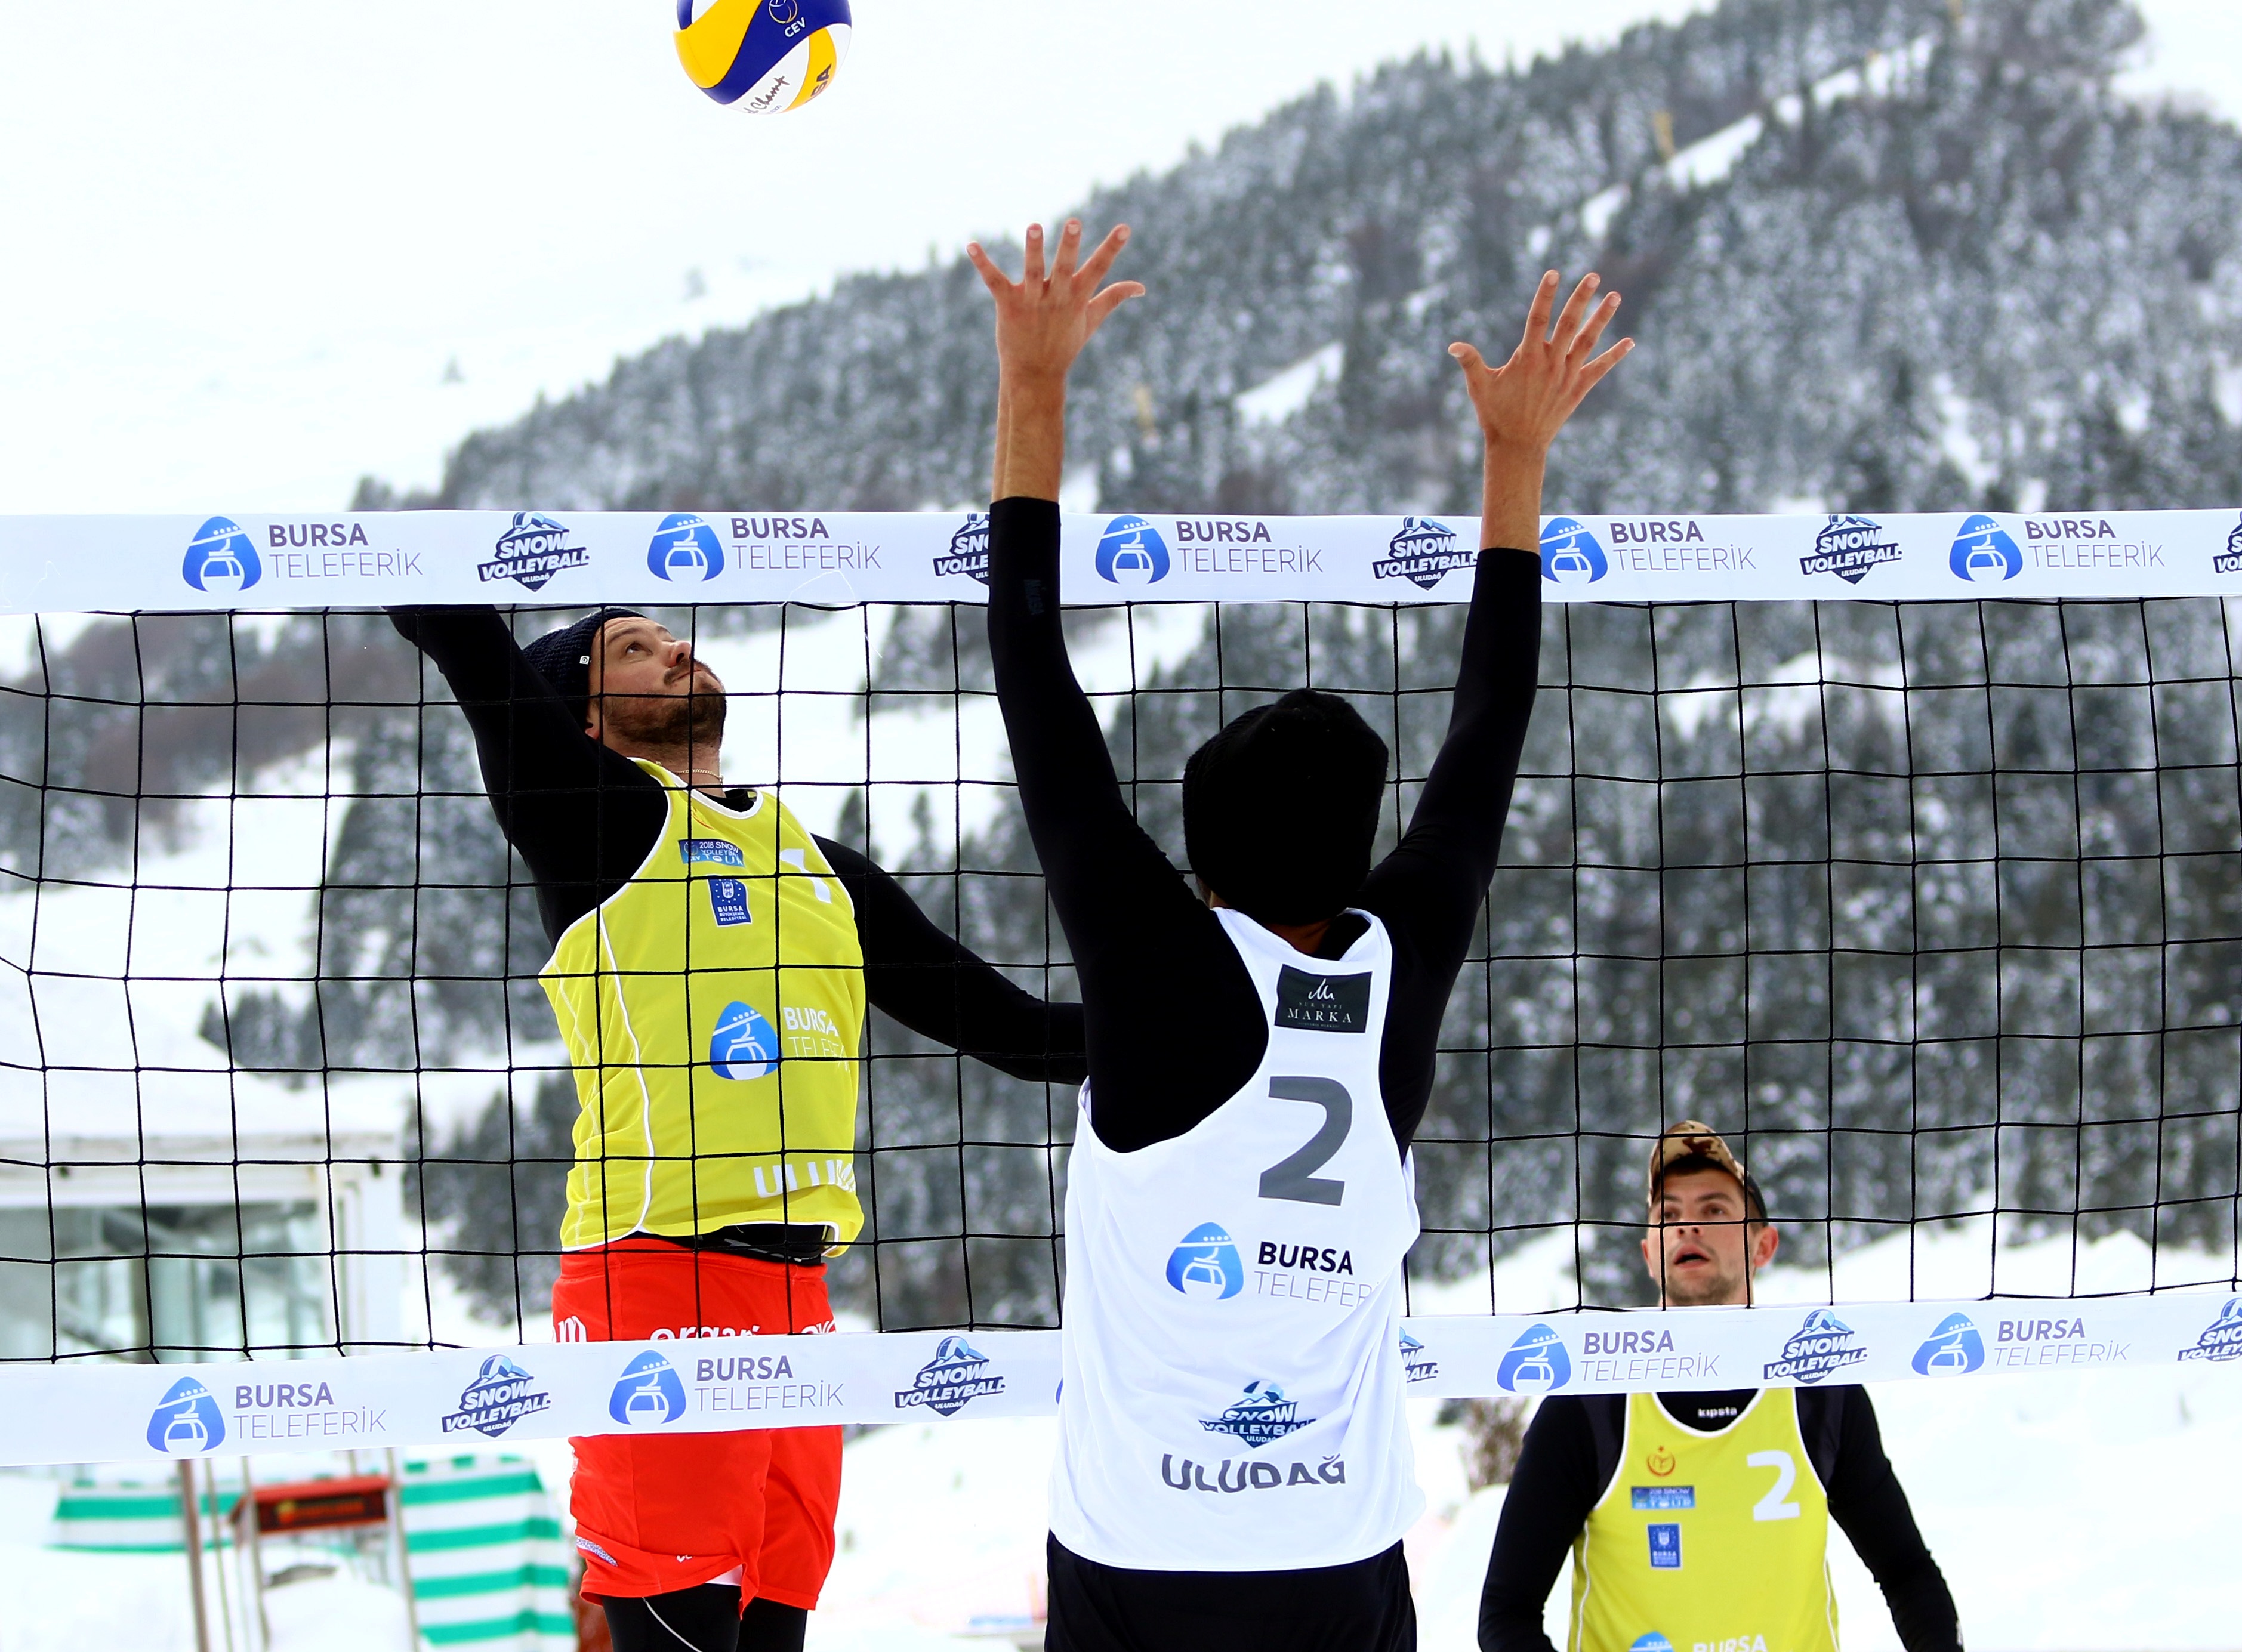 Top seeds live up to expectations on Uludag first day CEV